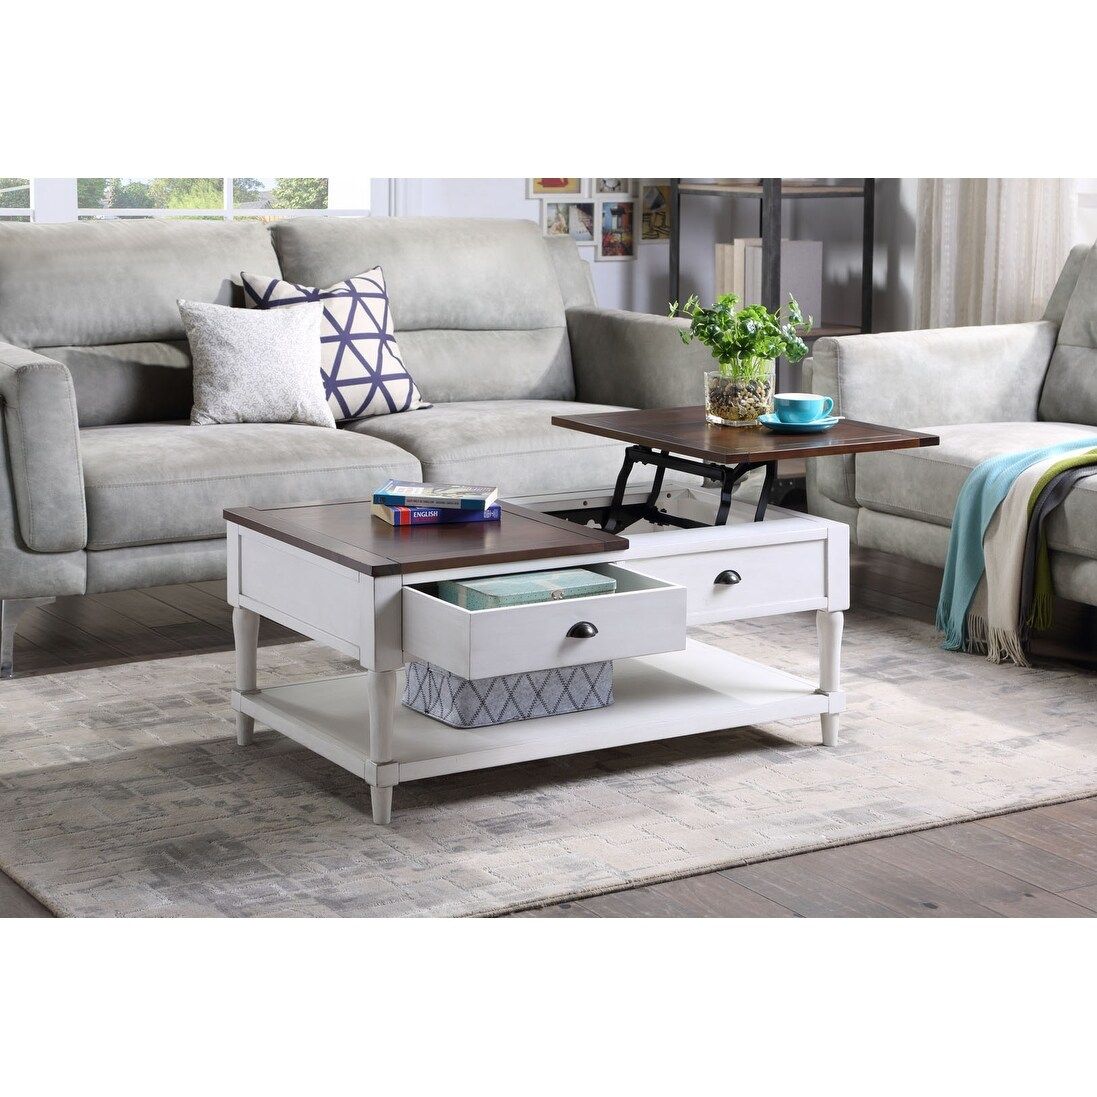 Coffee Table Lift Top Wood Home Living Room, with 1 Drawer and Shelf, White and Brown | Bed Bath & Beyond